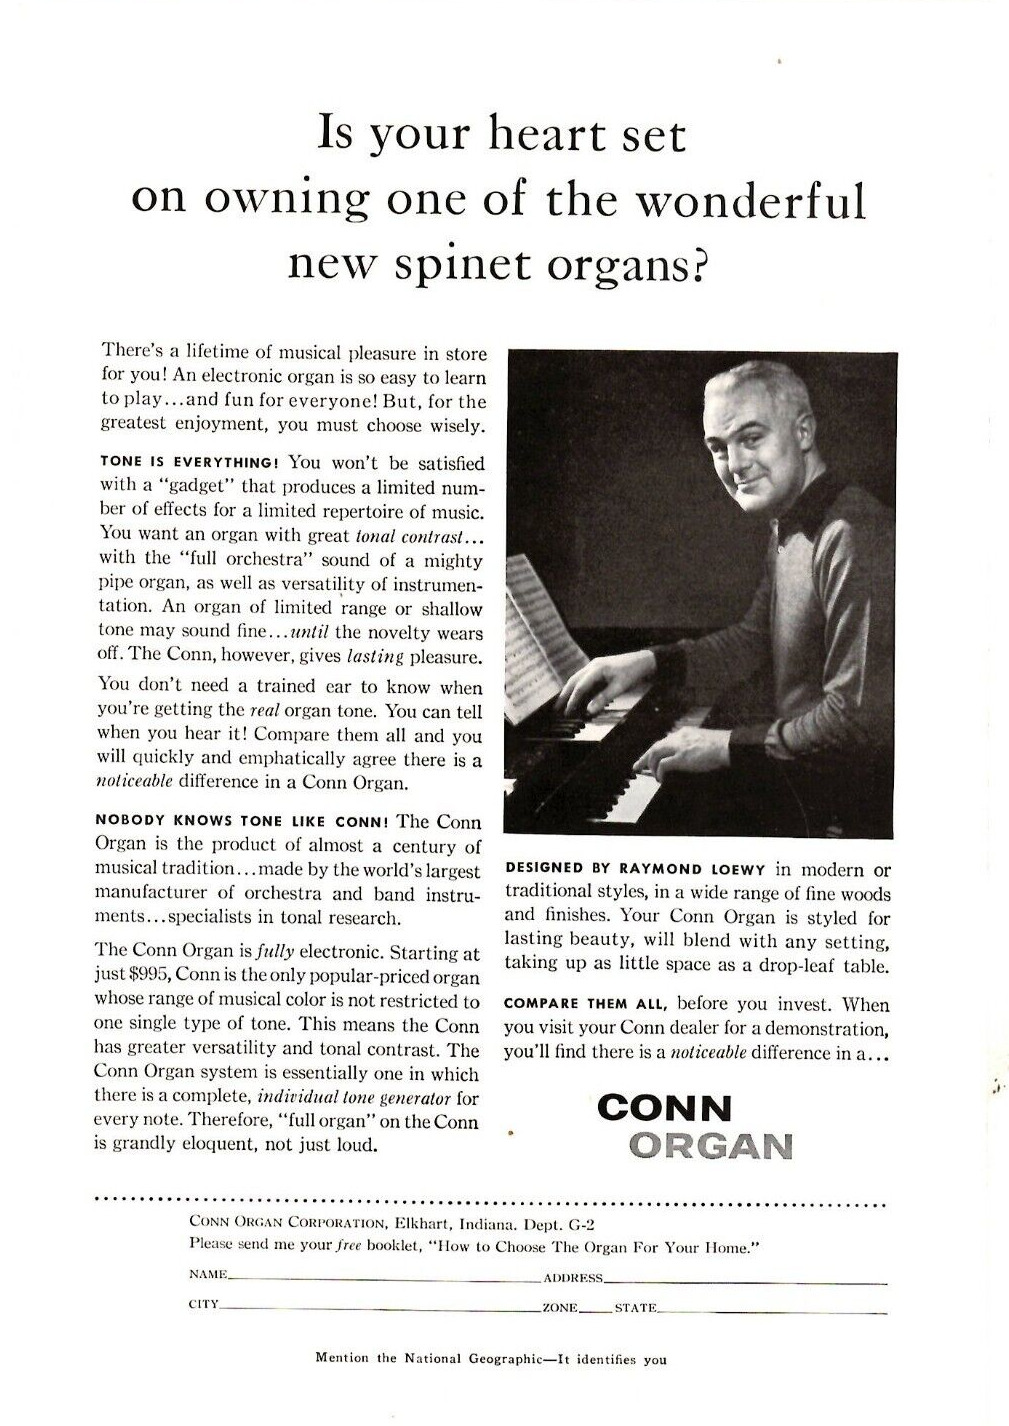 1958 Print Ad Conn Organ Is Your Heart Set on Owning one of the Wonderful Spinet